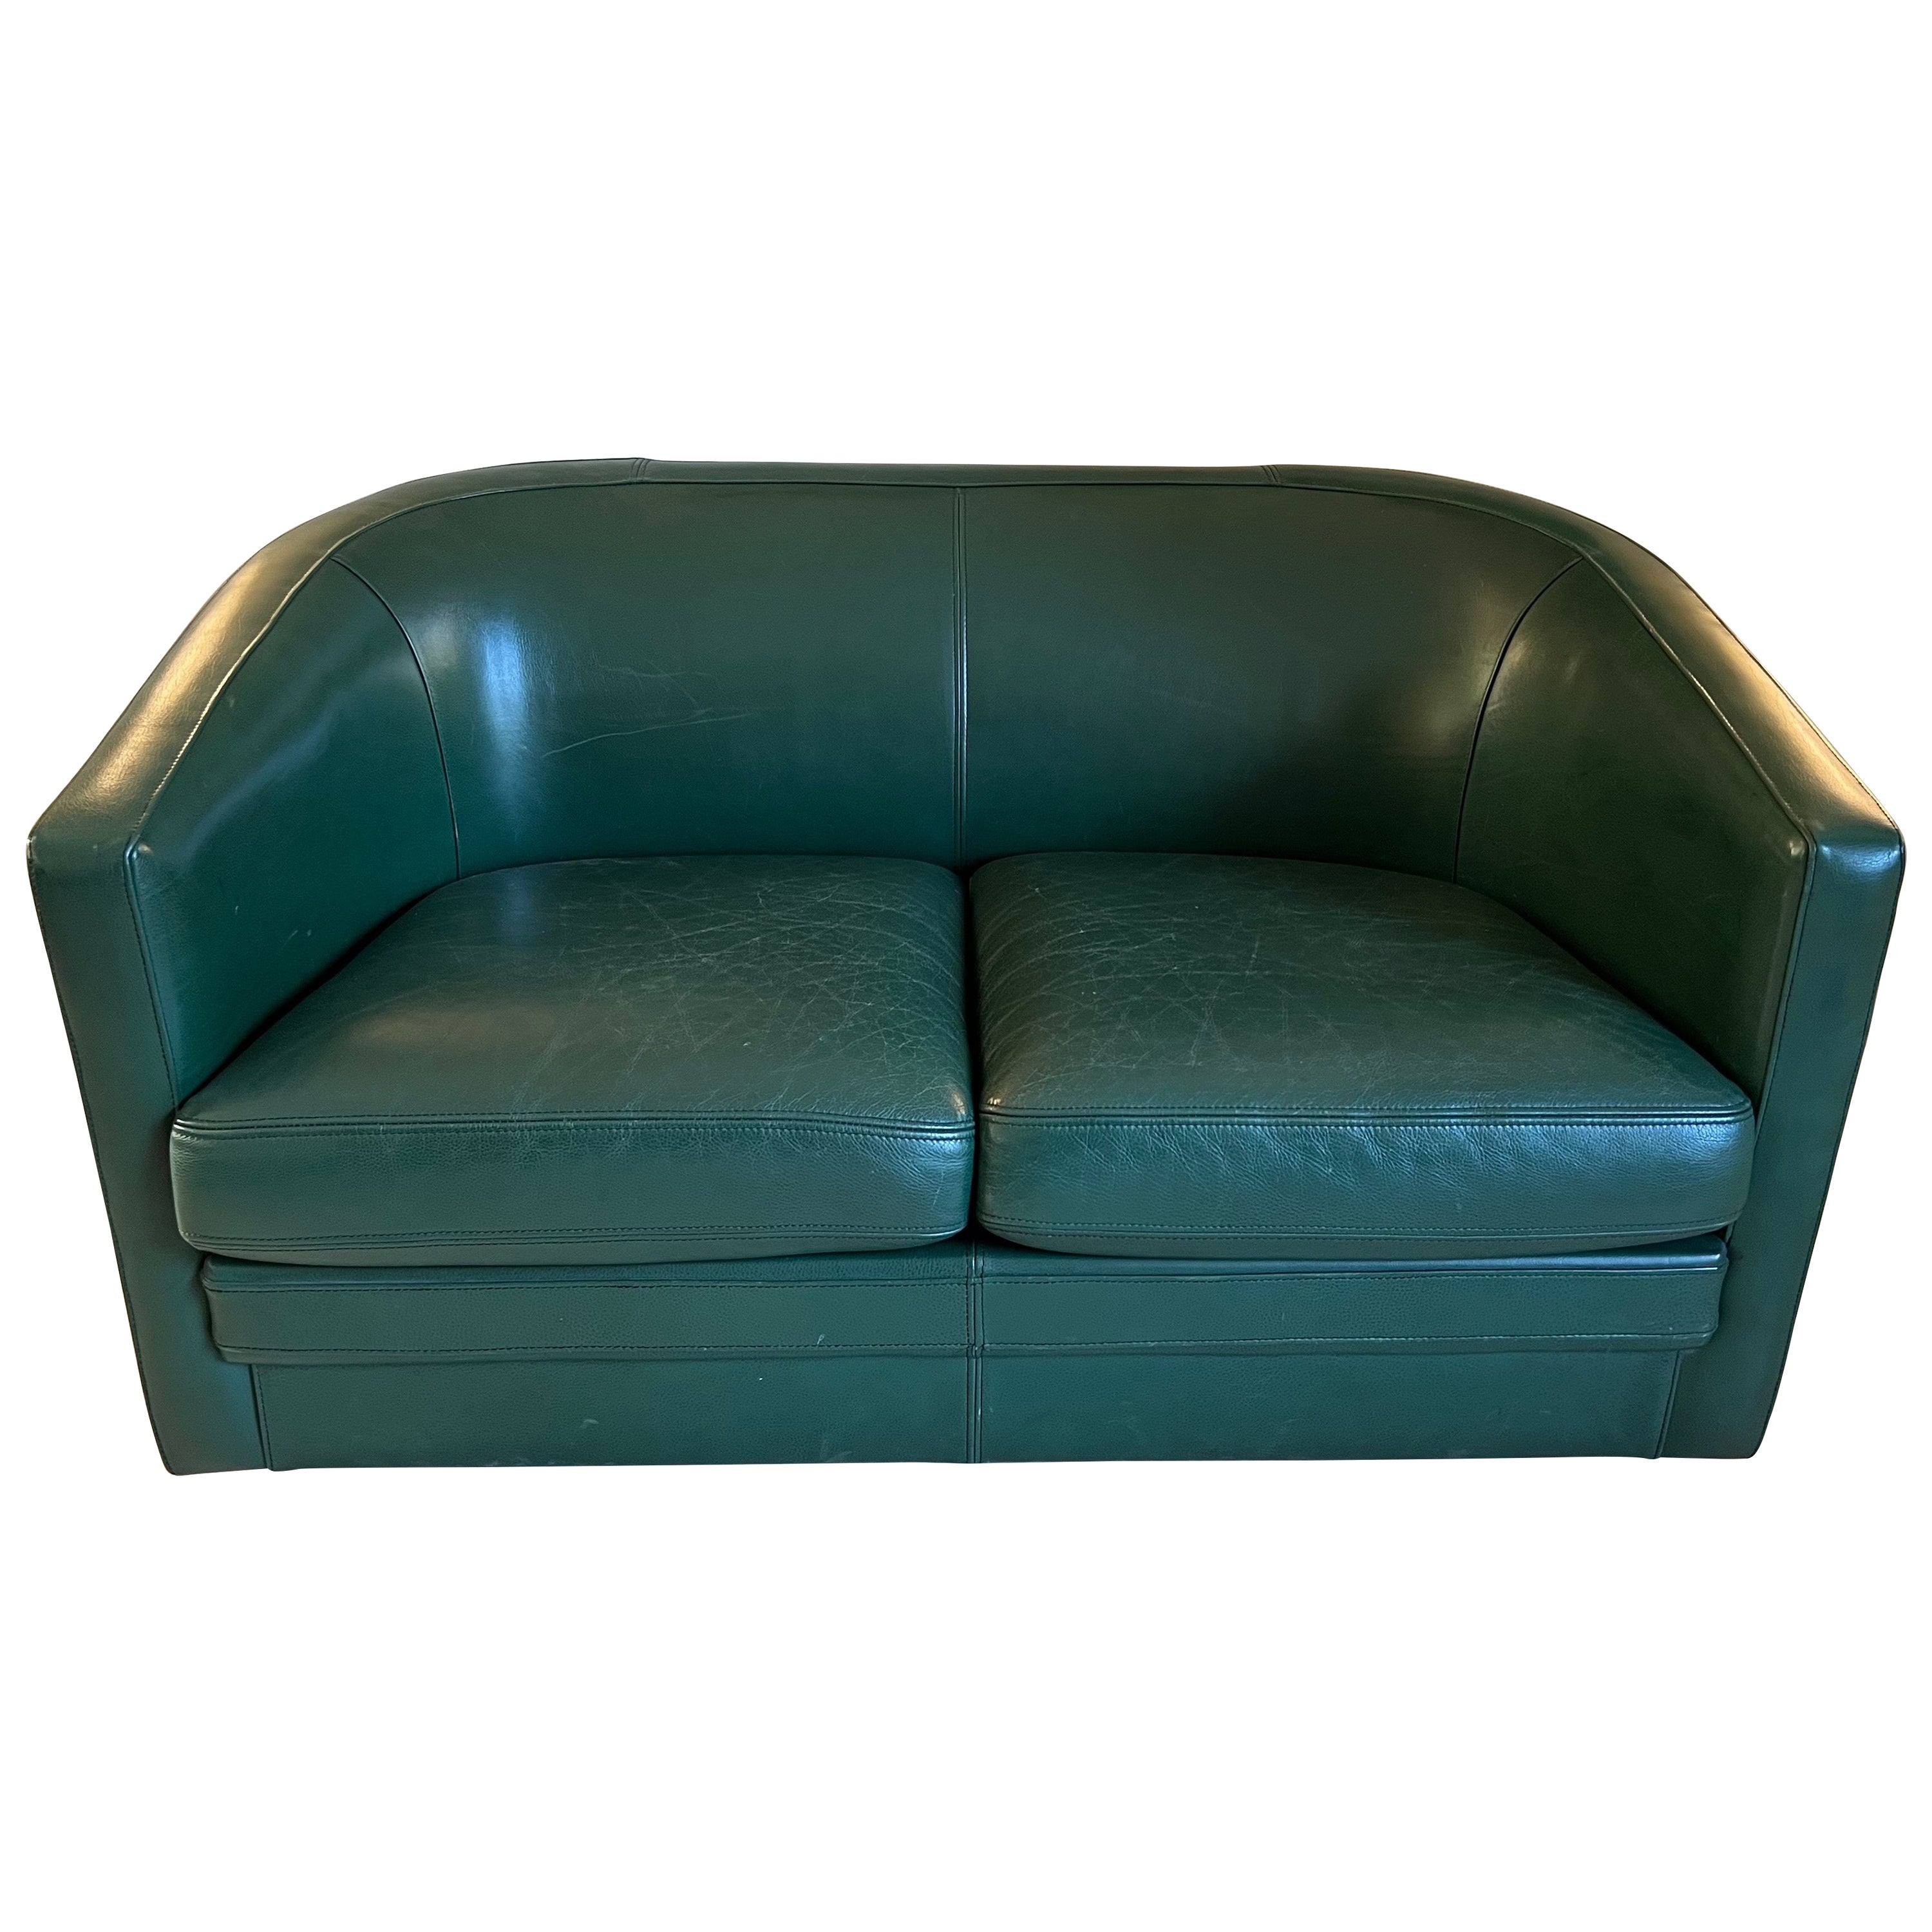 Art Deco Style Green Leather Two Seats Sofa. Circa 1980 For Sale